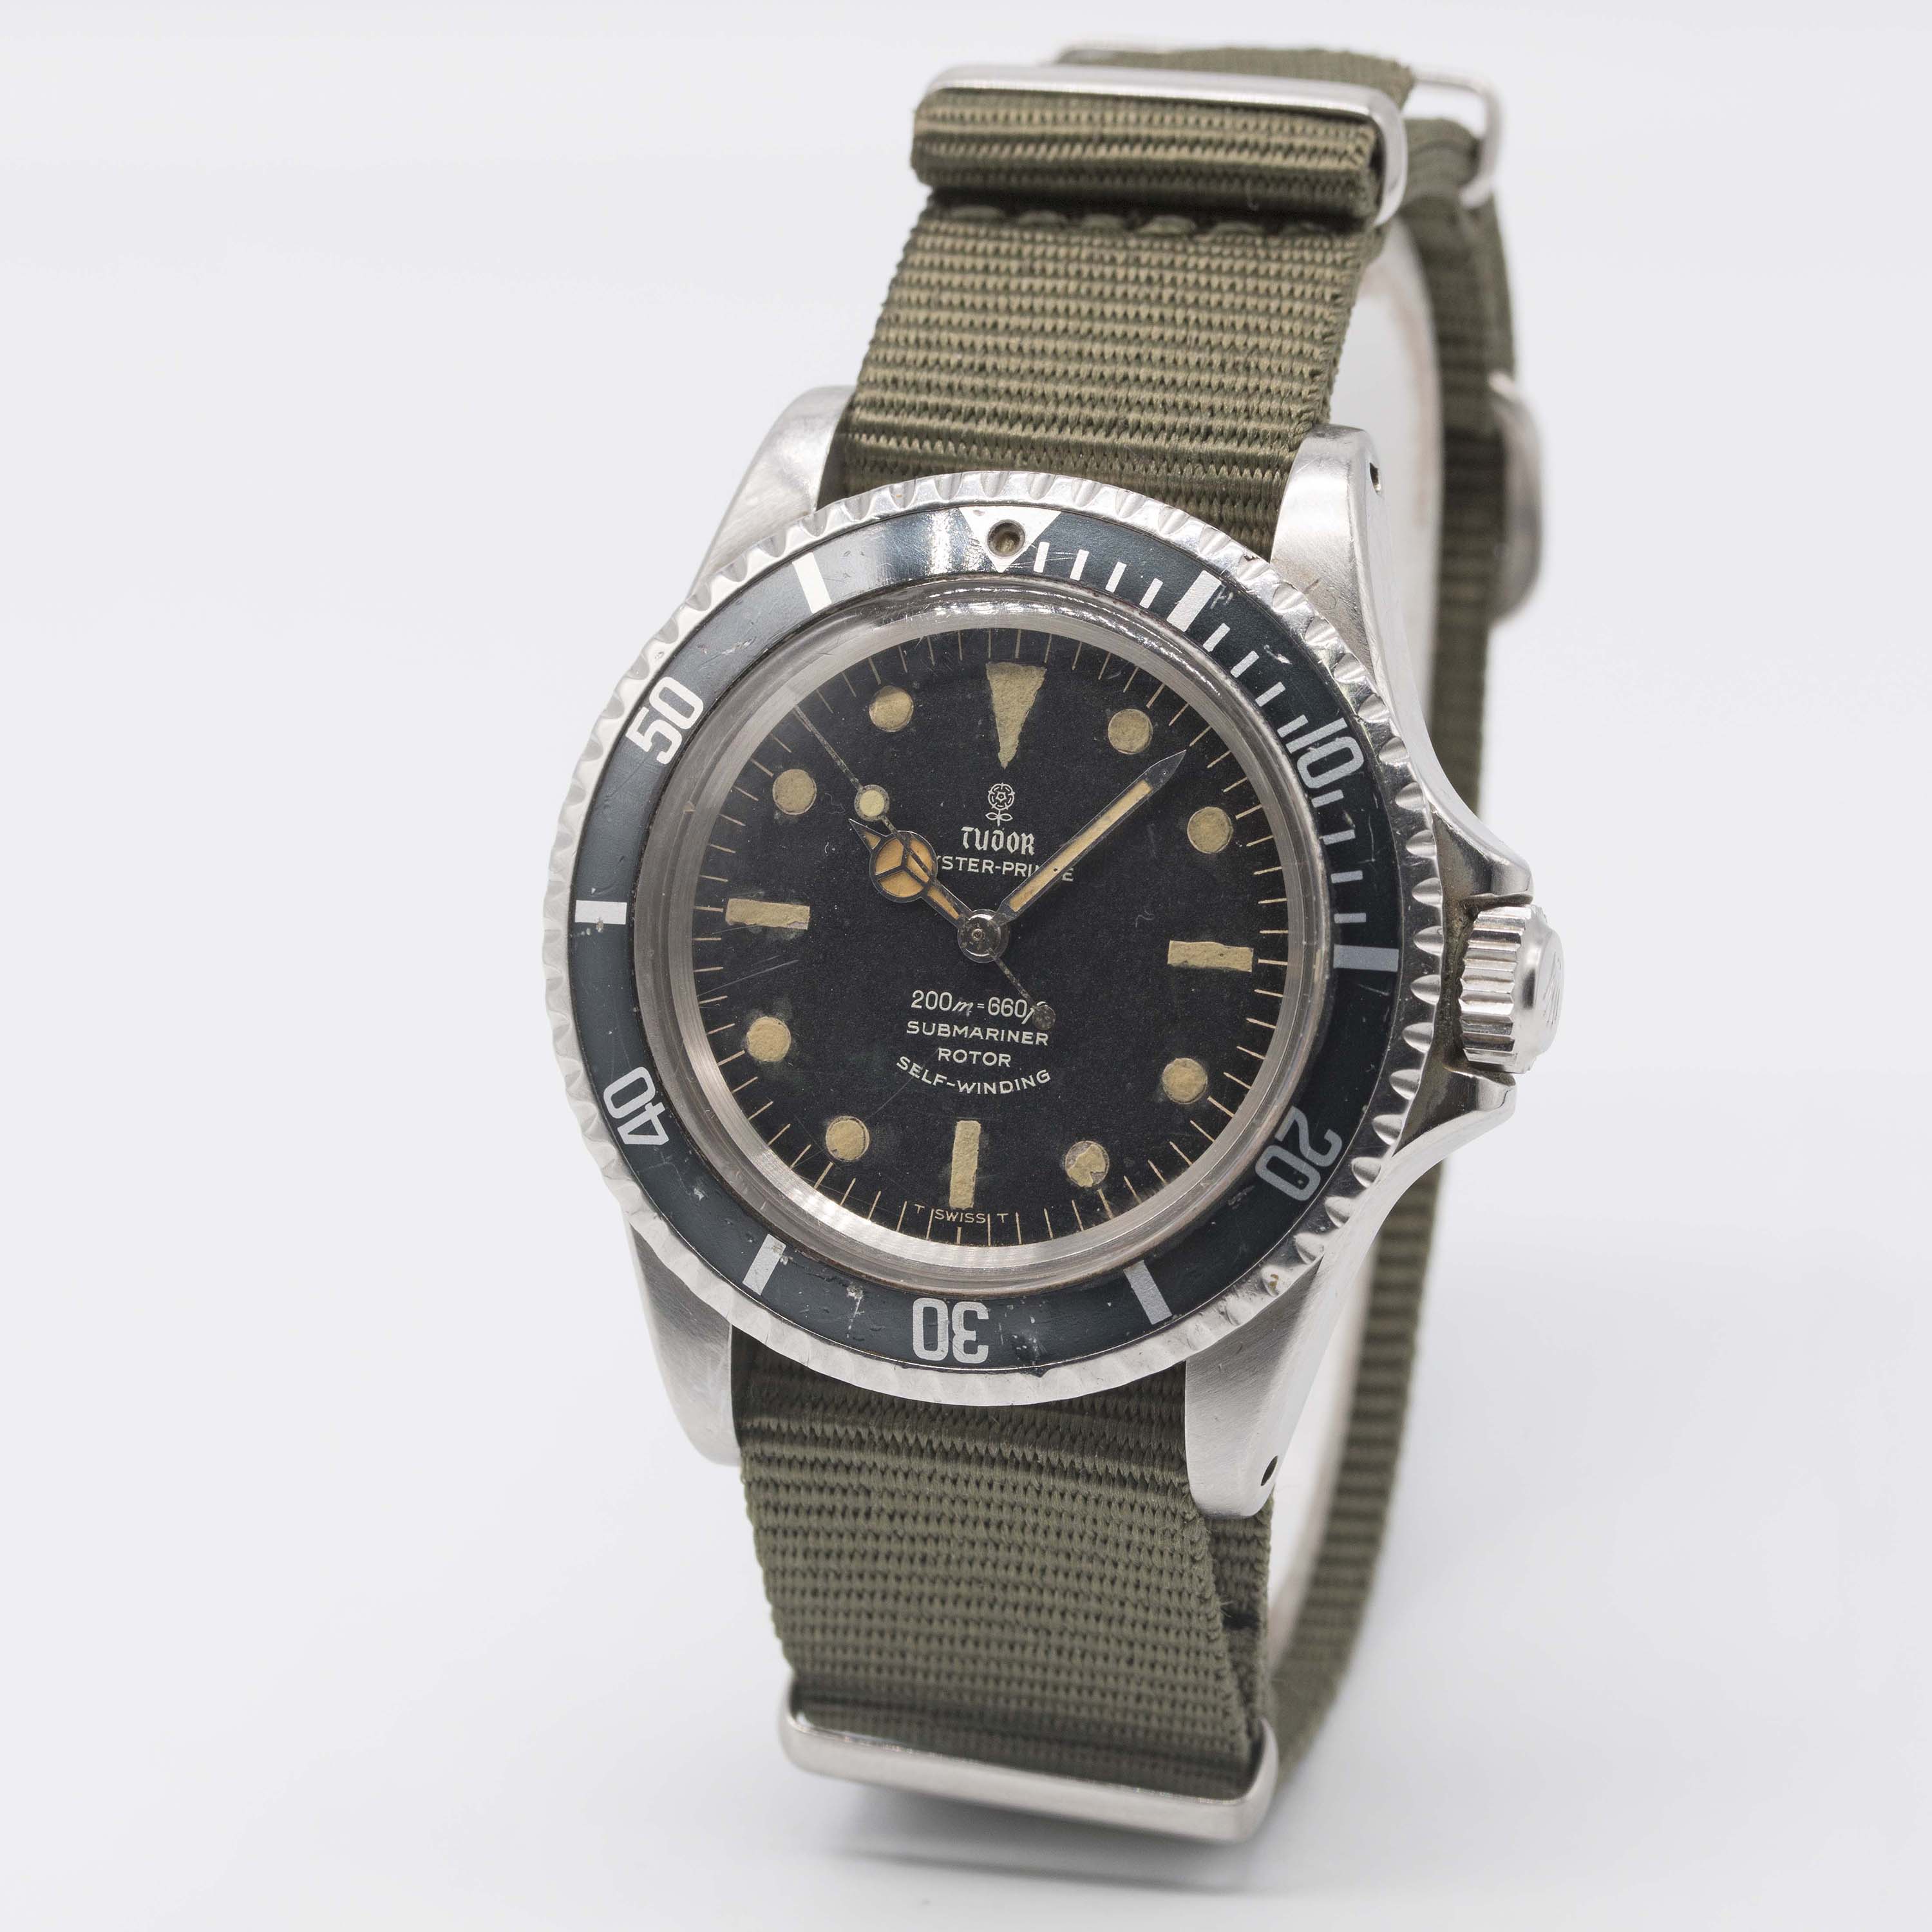 A GENTLEMAN'S STAINLESS STEEL ROLEX TUDOR OYSTER PRINCE SUBMARINER WRIST WATCH CIRCA 1967, REF. - Image 4 of 10